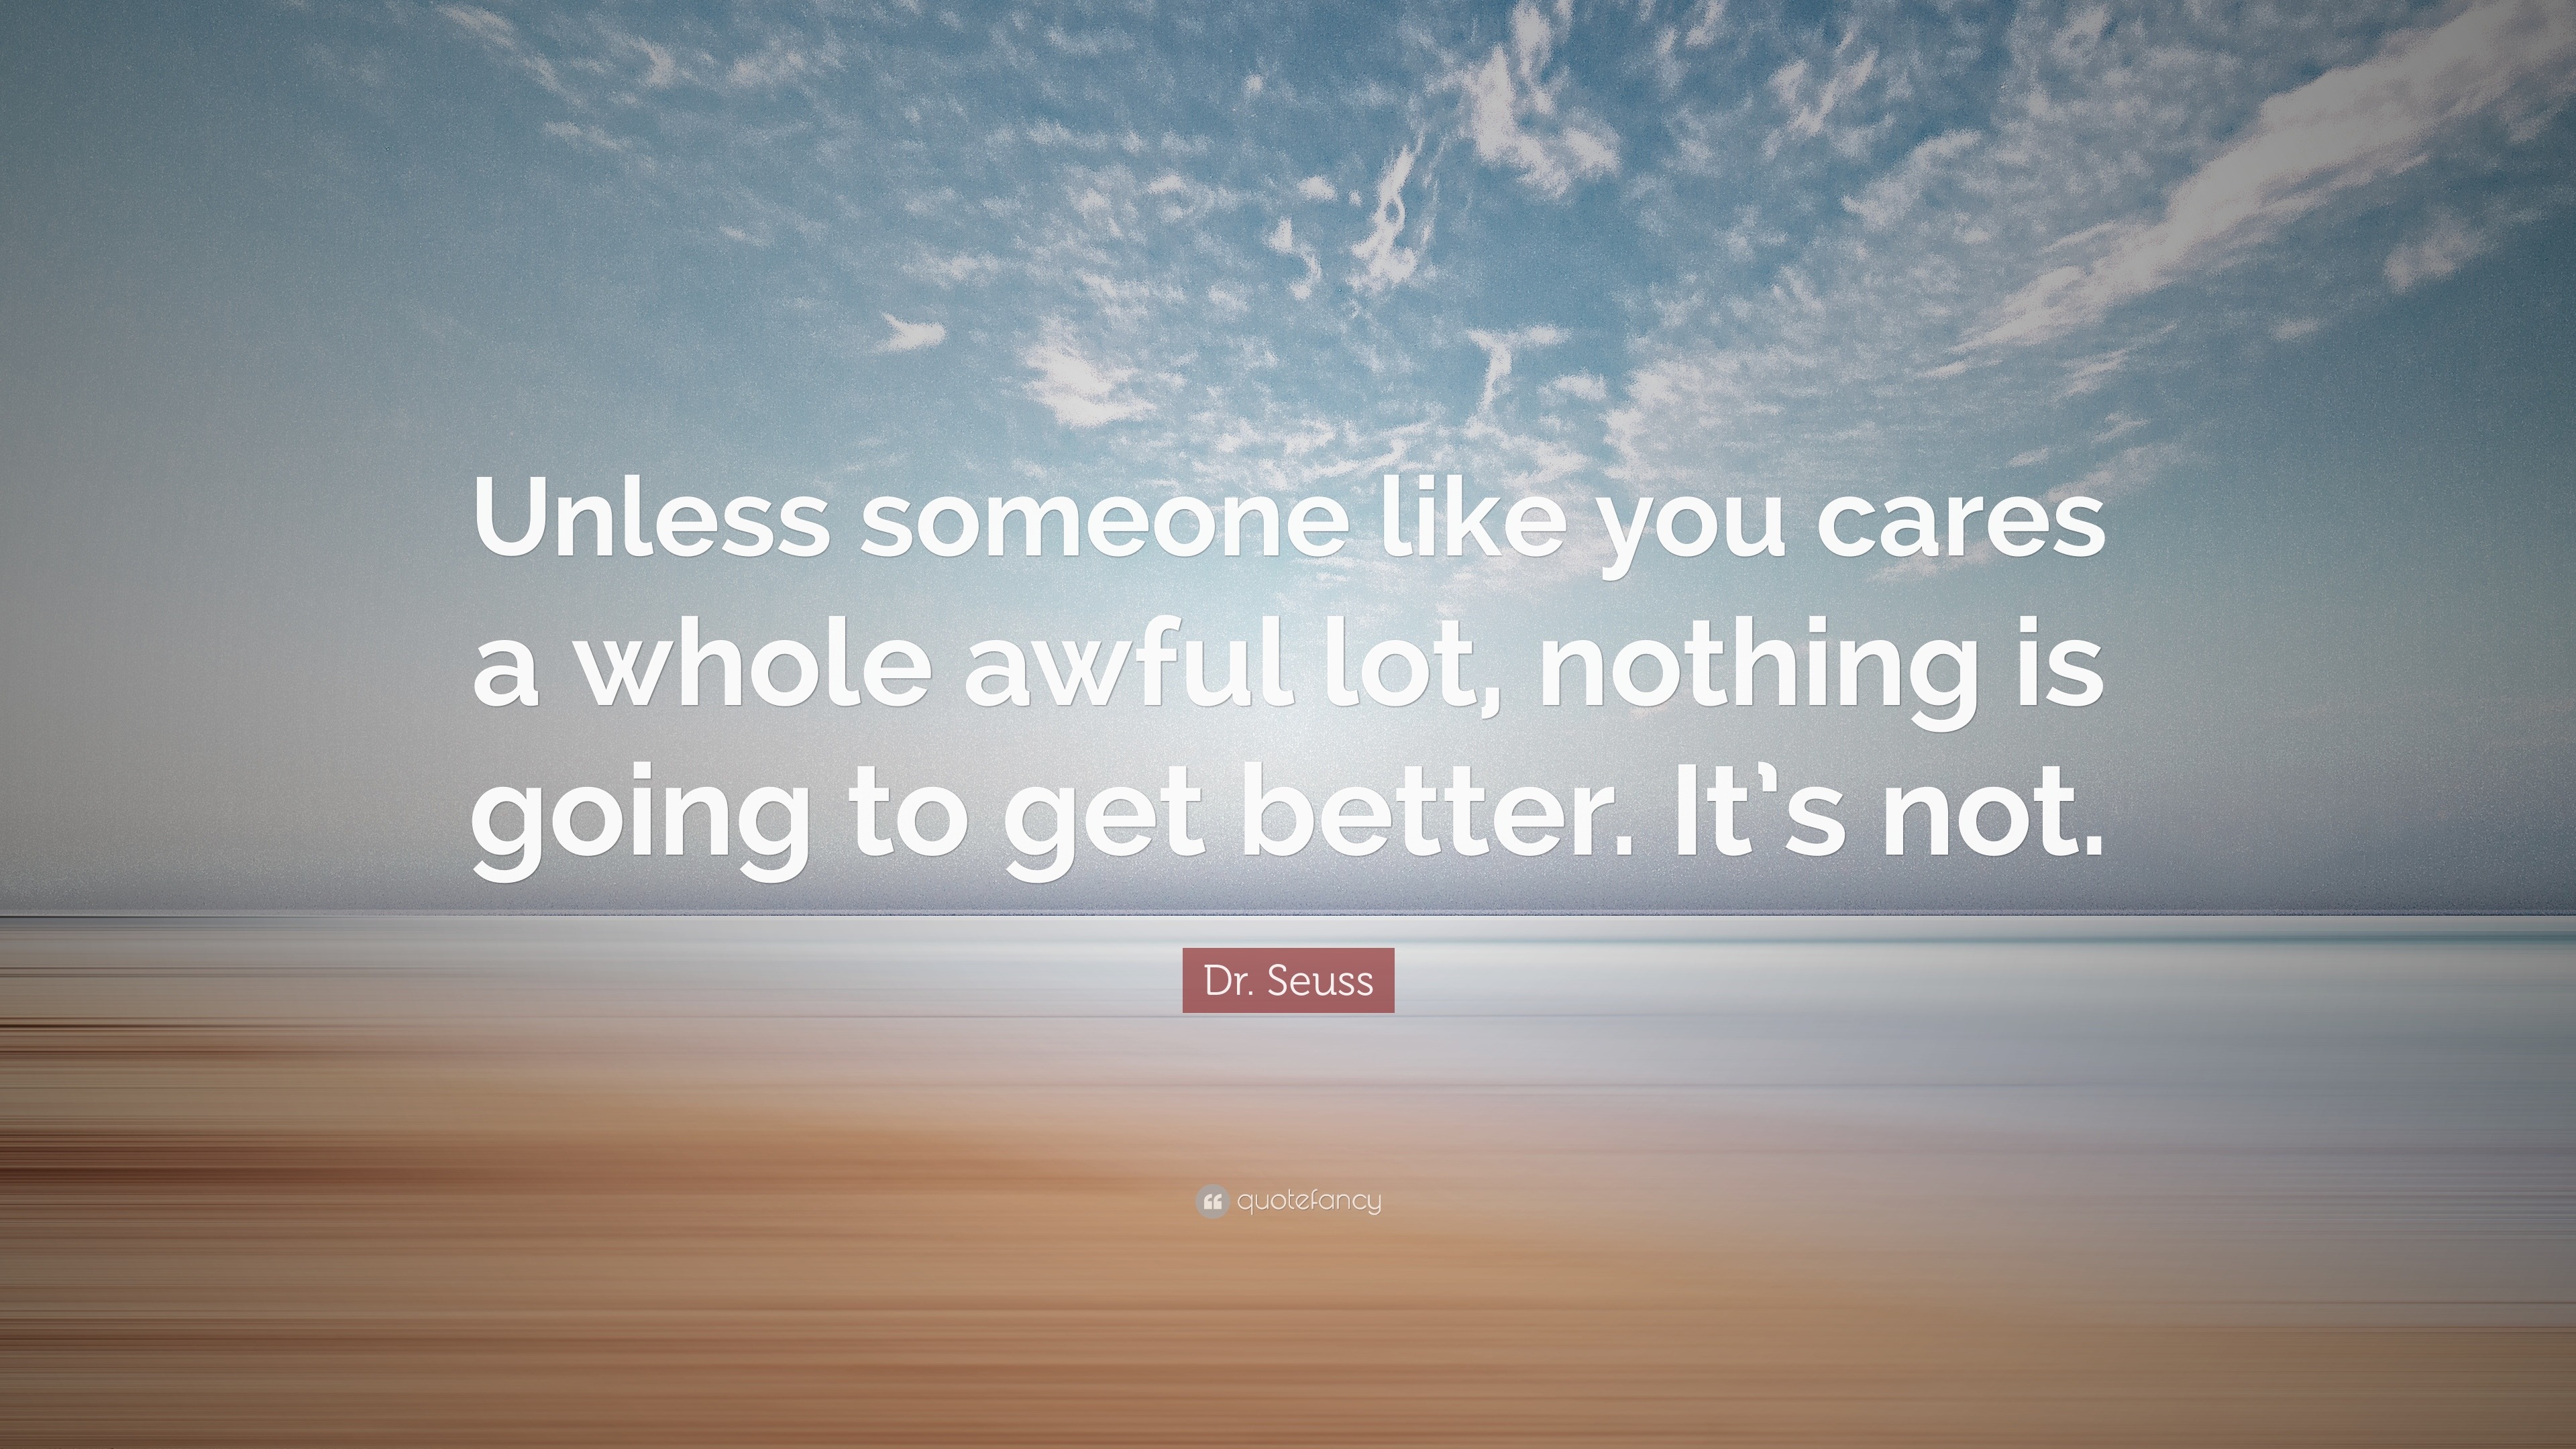 Dr. Seuss Quote: “Unless someone like you cares a whole awful lot